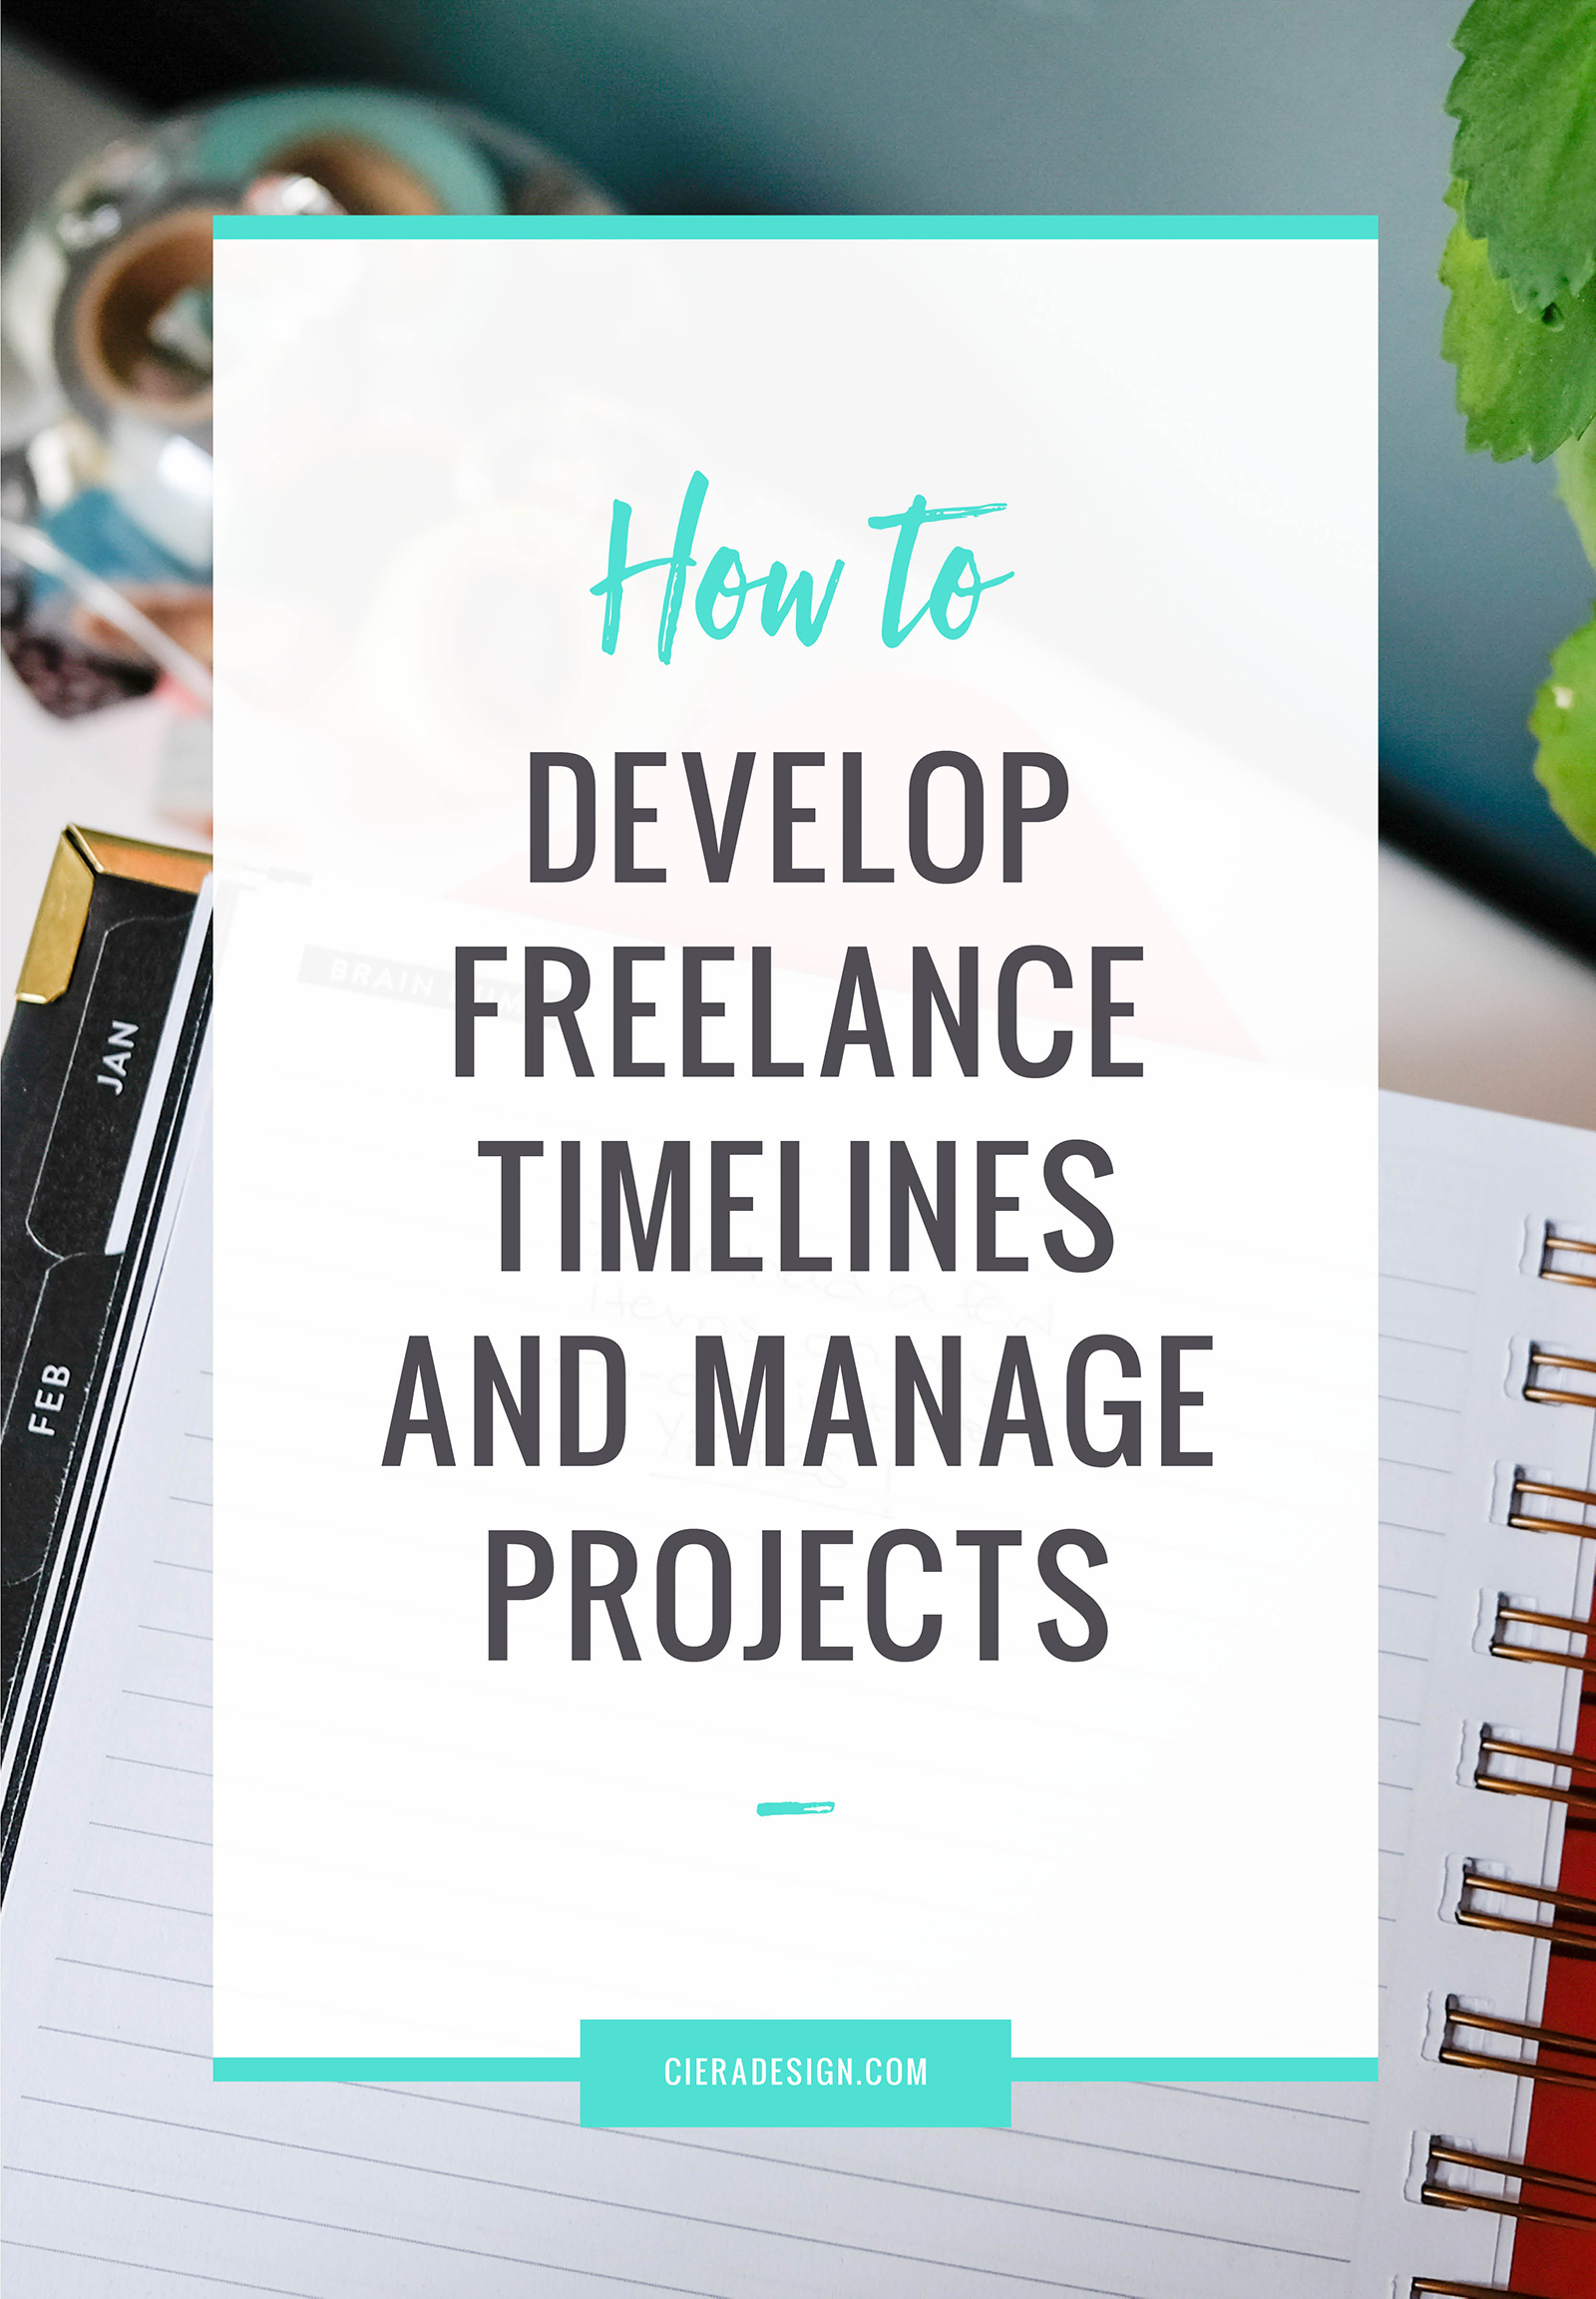 Freelance tips on developing a project production schedule and handling multiple deadlines and overlapping projects.